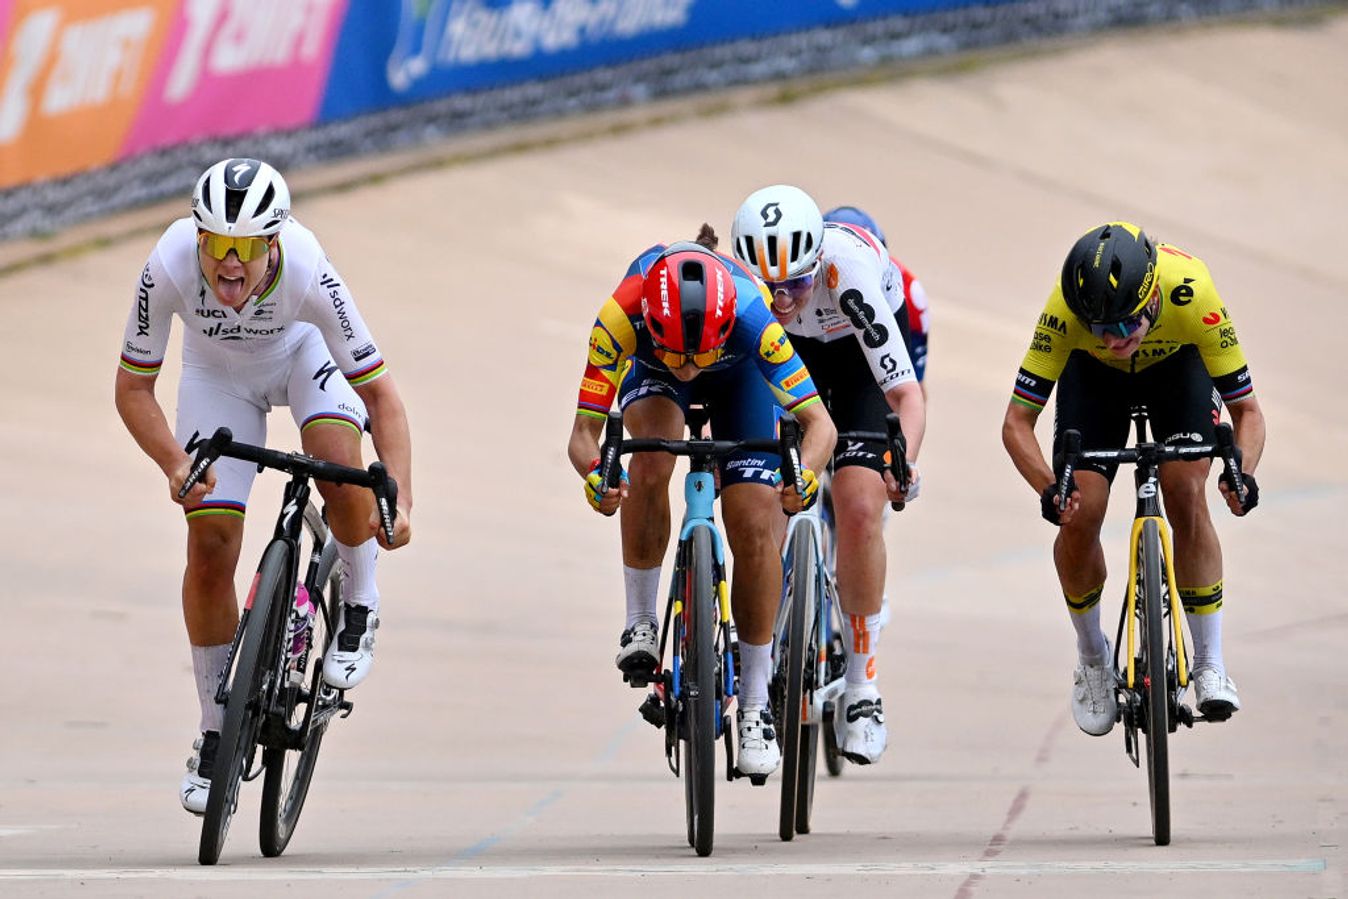 Vos was one of the strongest on the day but came up short when it matter most: on the velodrome finish